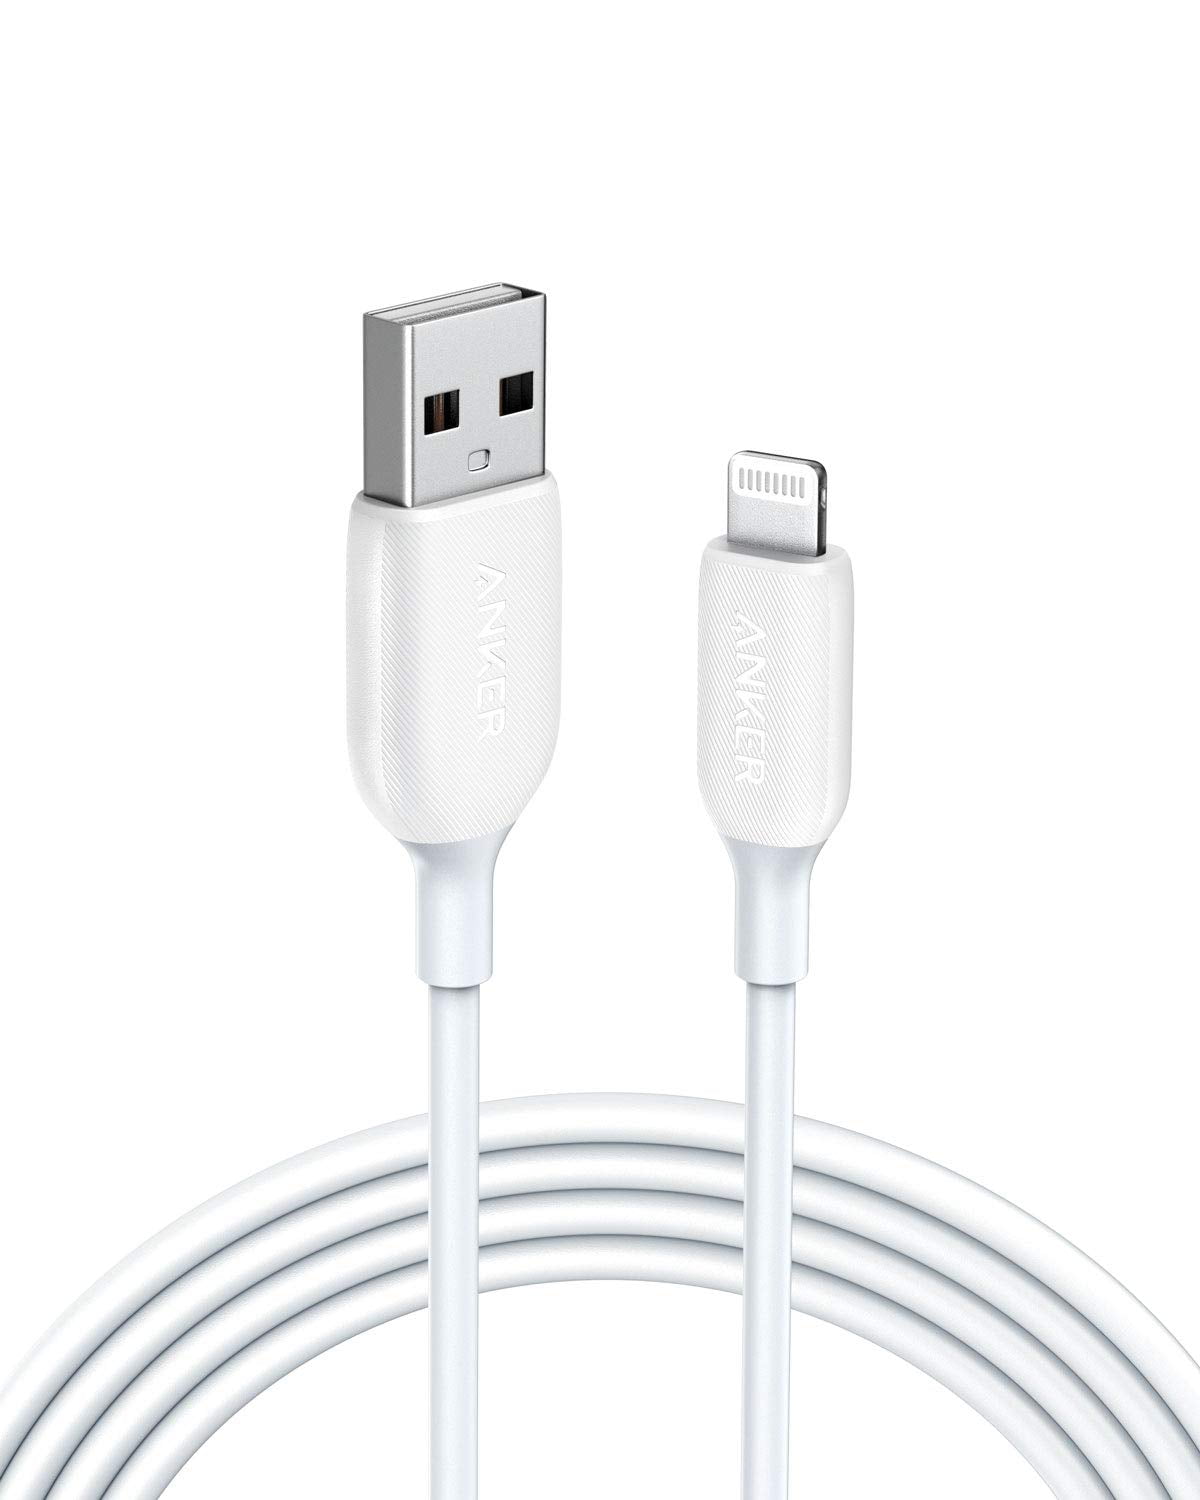 10ft Anker Powerline+ II Lightning Cable MFi Certified for Flawless Compatibility with iPhone Xs/XS Max/XR/X / 8/8 Plus / 7/7 Plus / 6/6 Plus / 5 / 5S and More Gold 